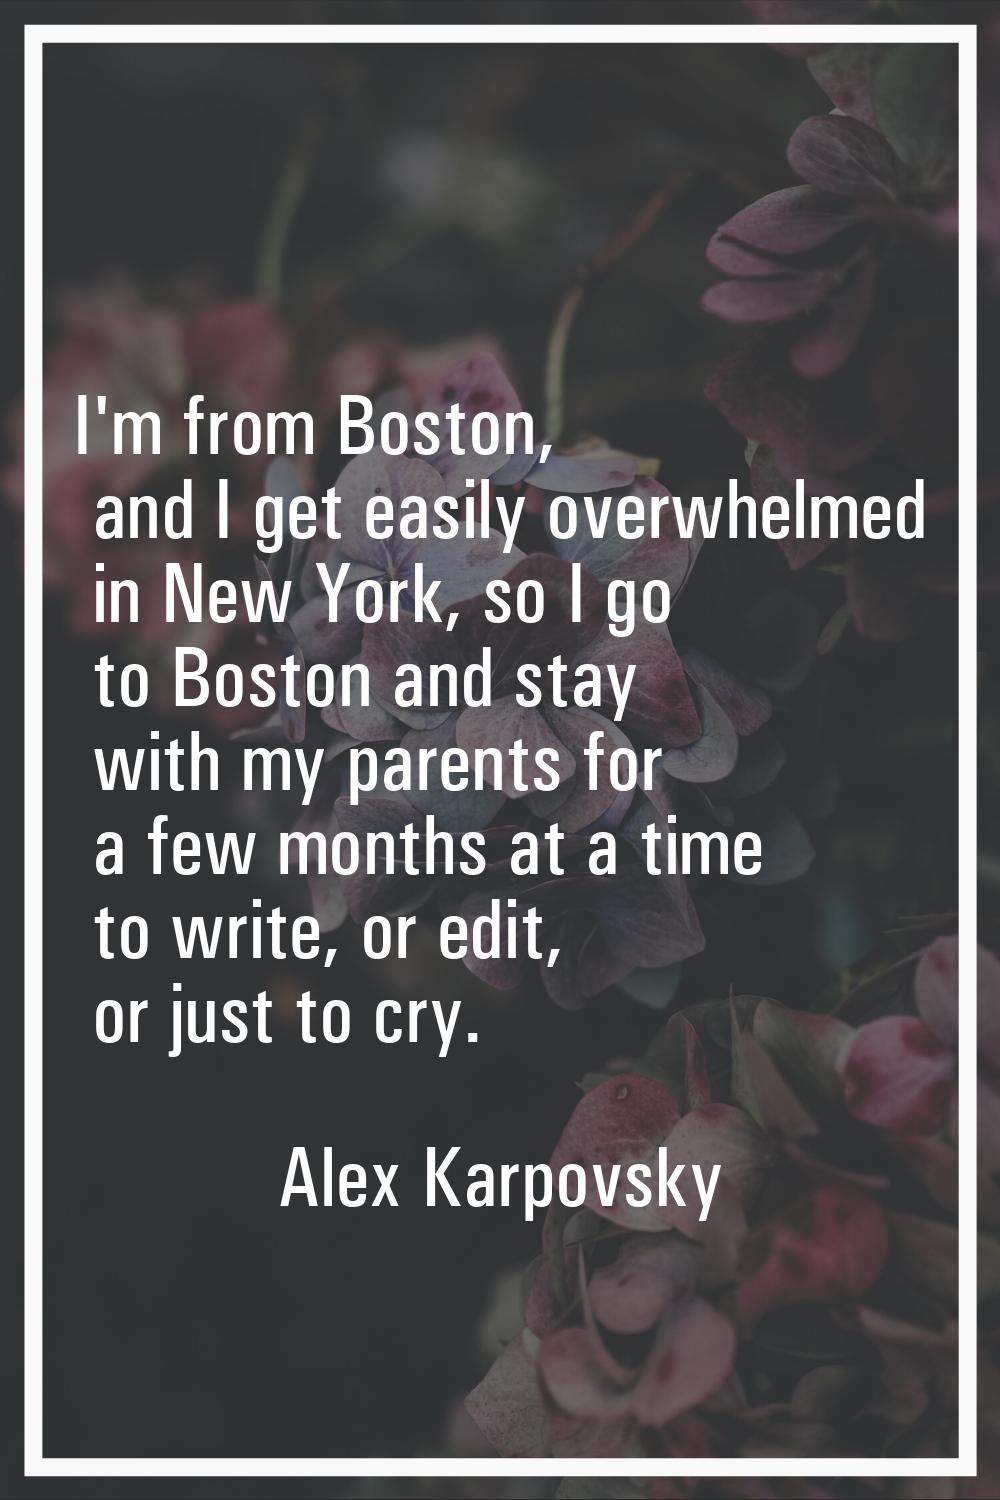 I'm from Boston, and I get easily overwhelmed in New York, so I go to Boston and stay with my paren